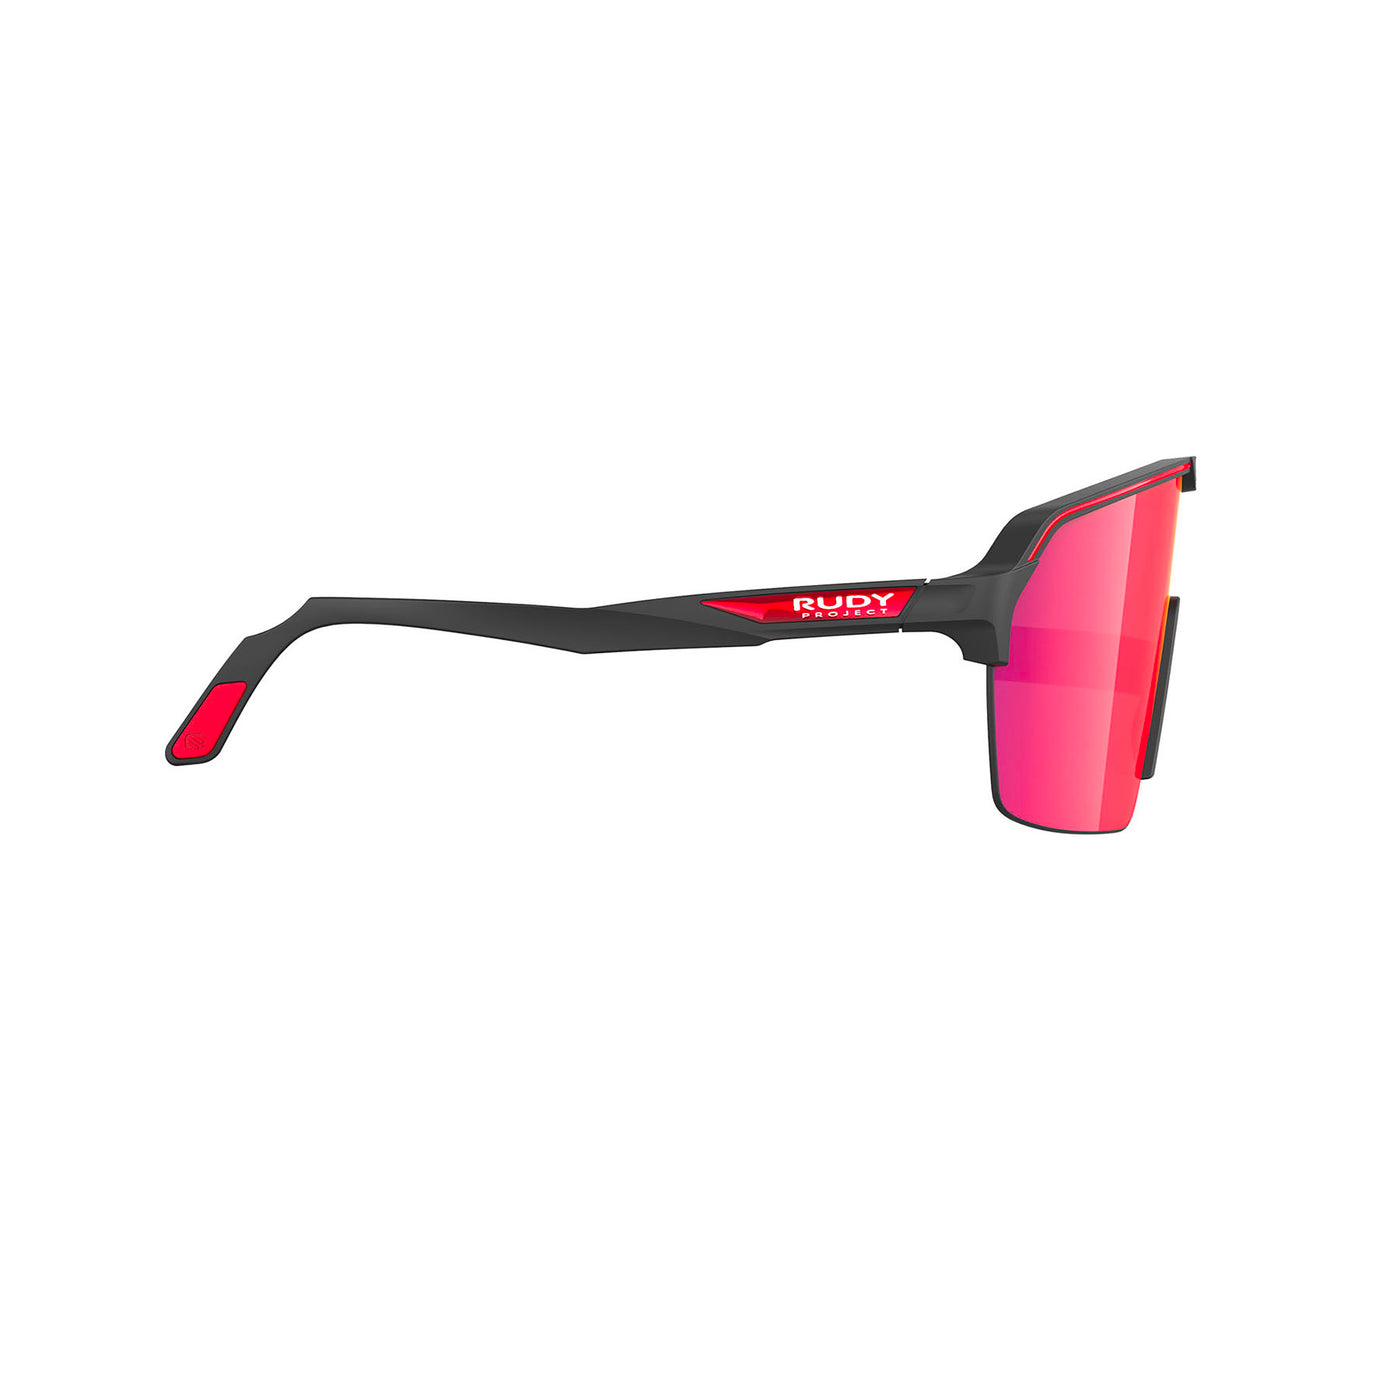 Rudy Project Spinshield Air running and cycling sport shield sunglasses#color_spinshield-air-black-matte-with-multilaser-red-lenses